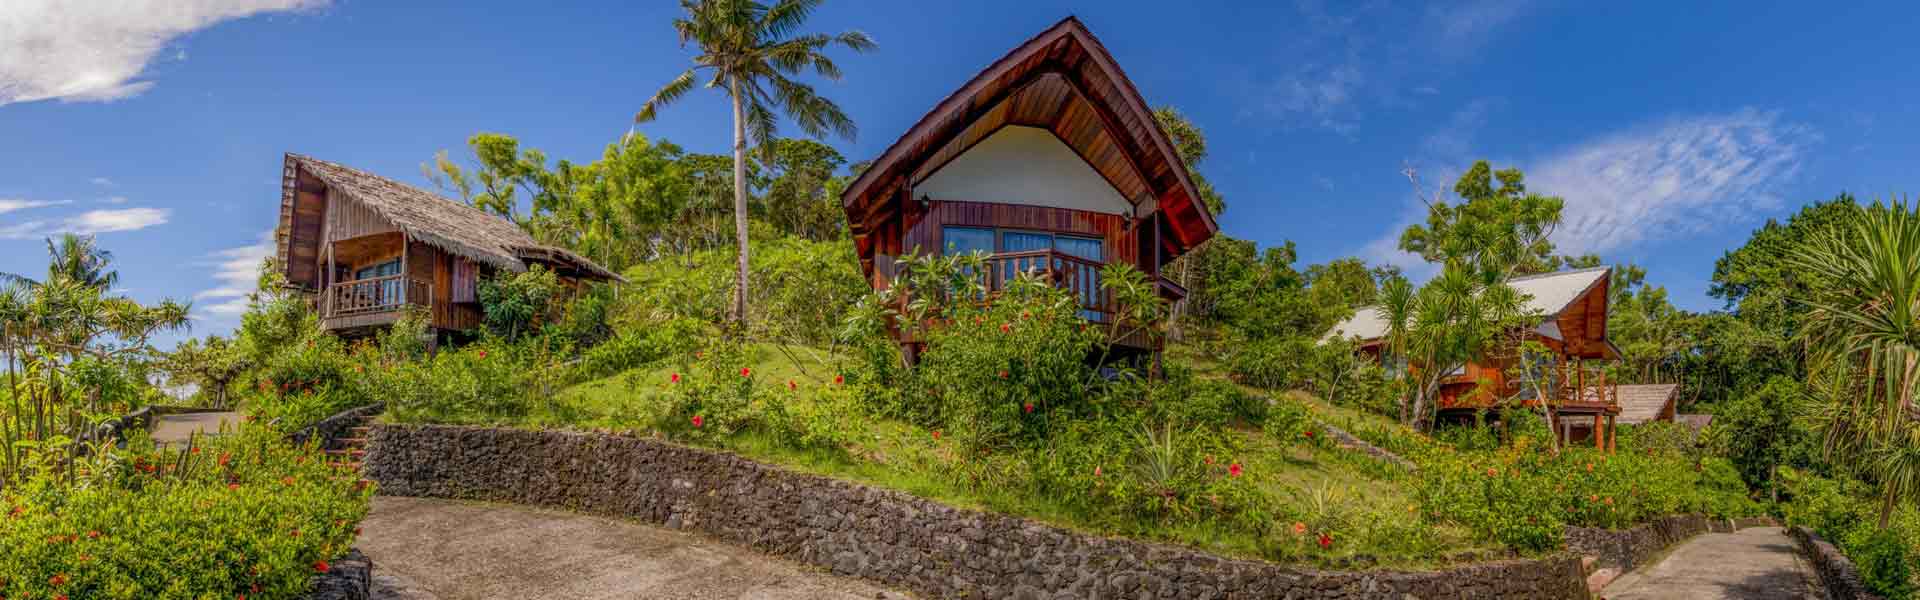 Island Escapes: 5 Nights of Tranquility in Micronesia w/ Transfers